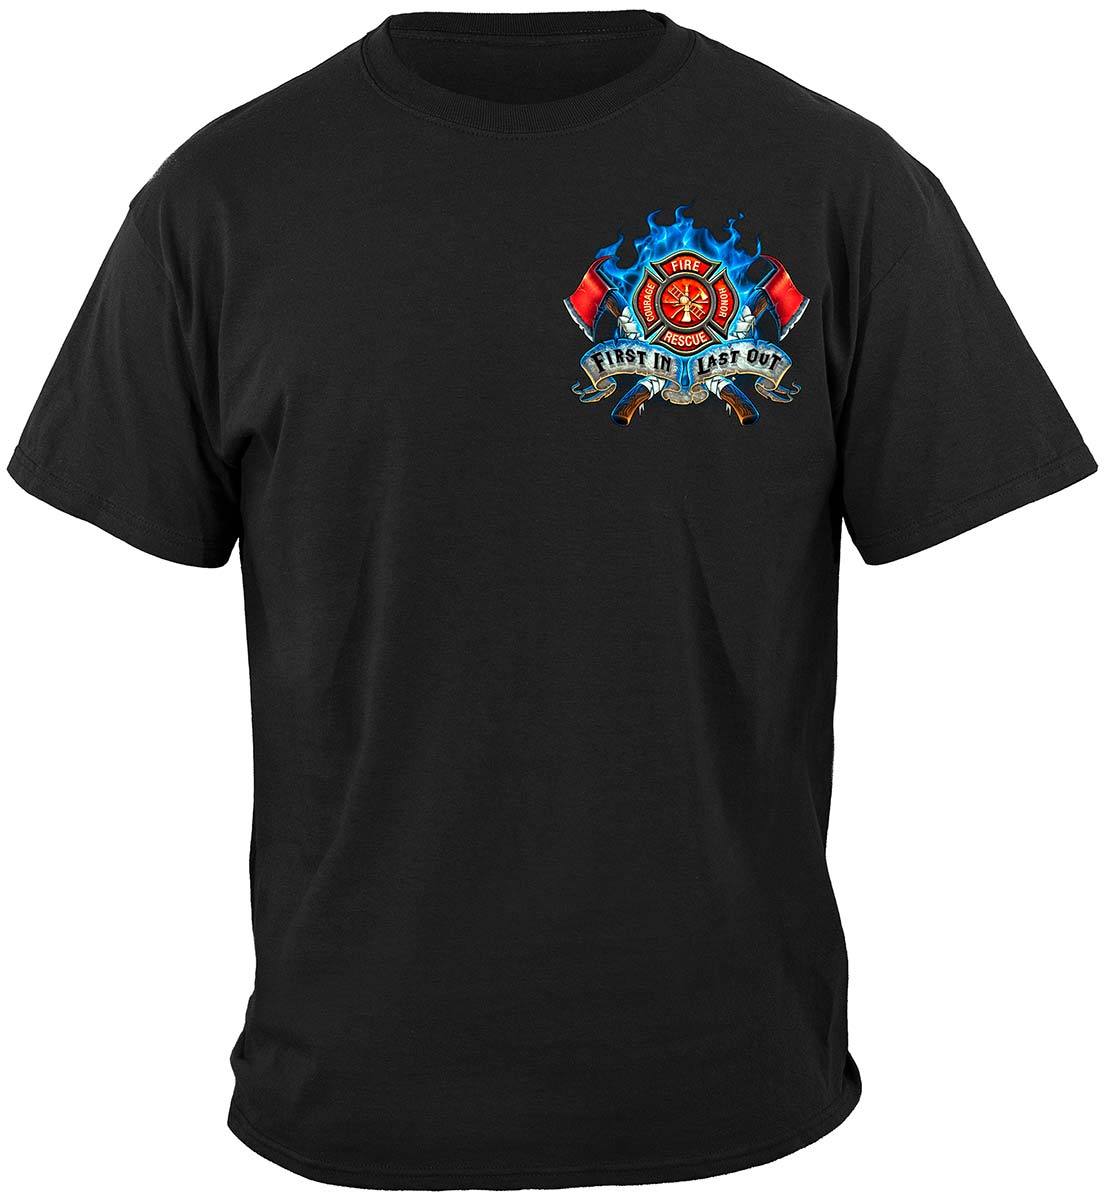 Firefighter Fire Dog First in Last Out Premium Hooded Sweat Shirt